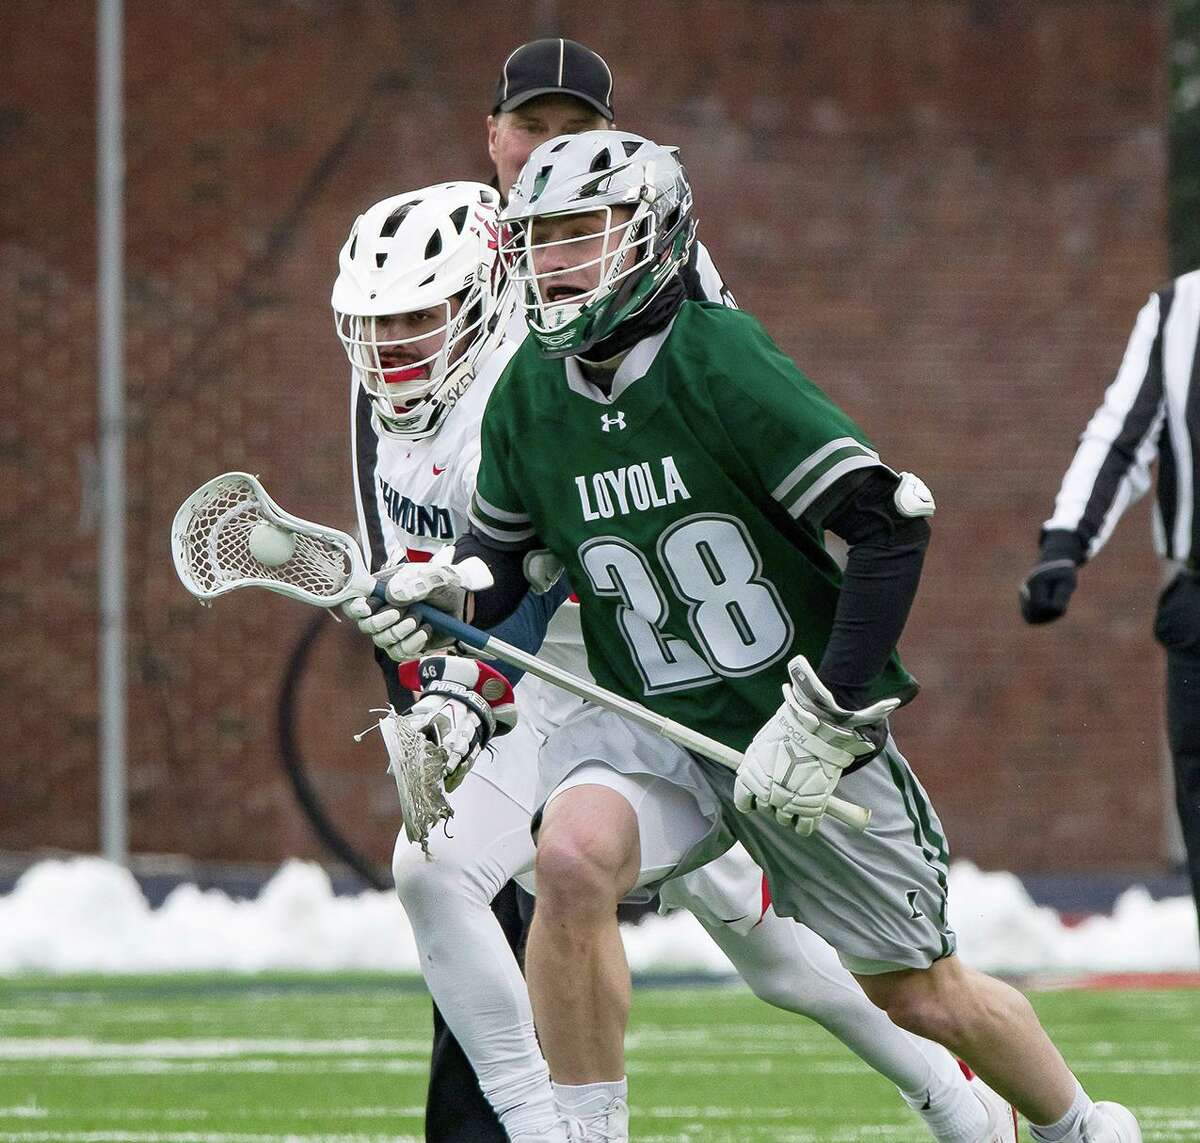 Darien lessons make Lindley a record-setter with Loyola lacrosse